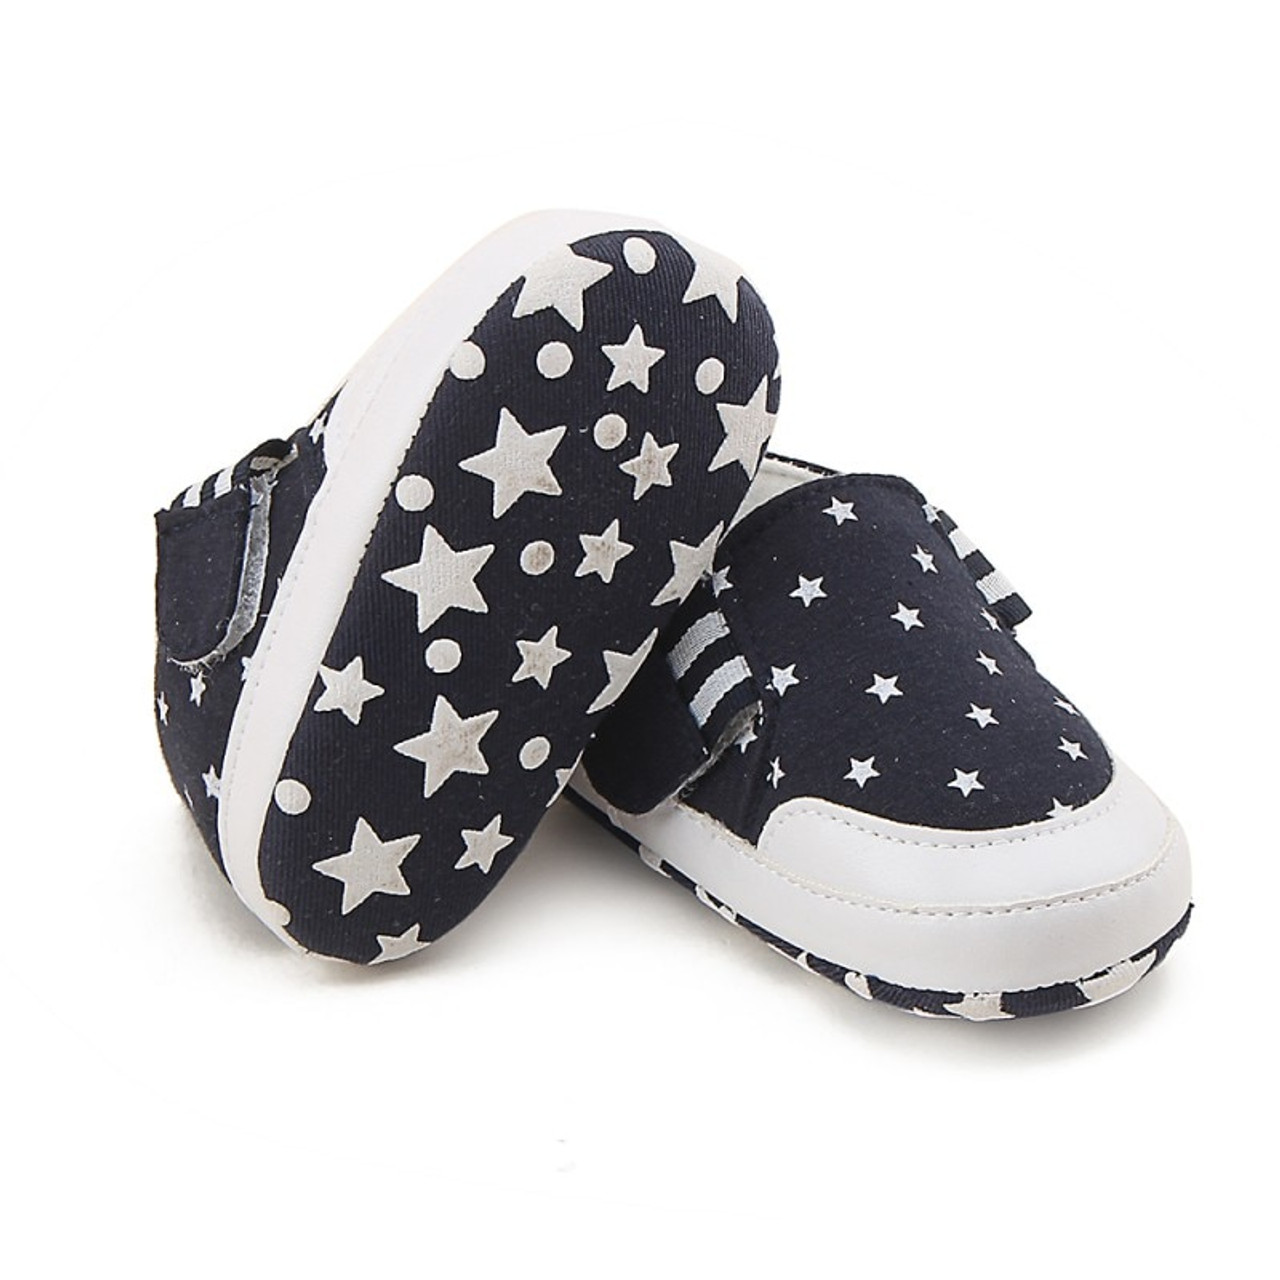 soft bottom walking shoes for babies